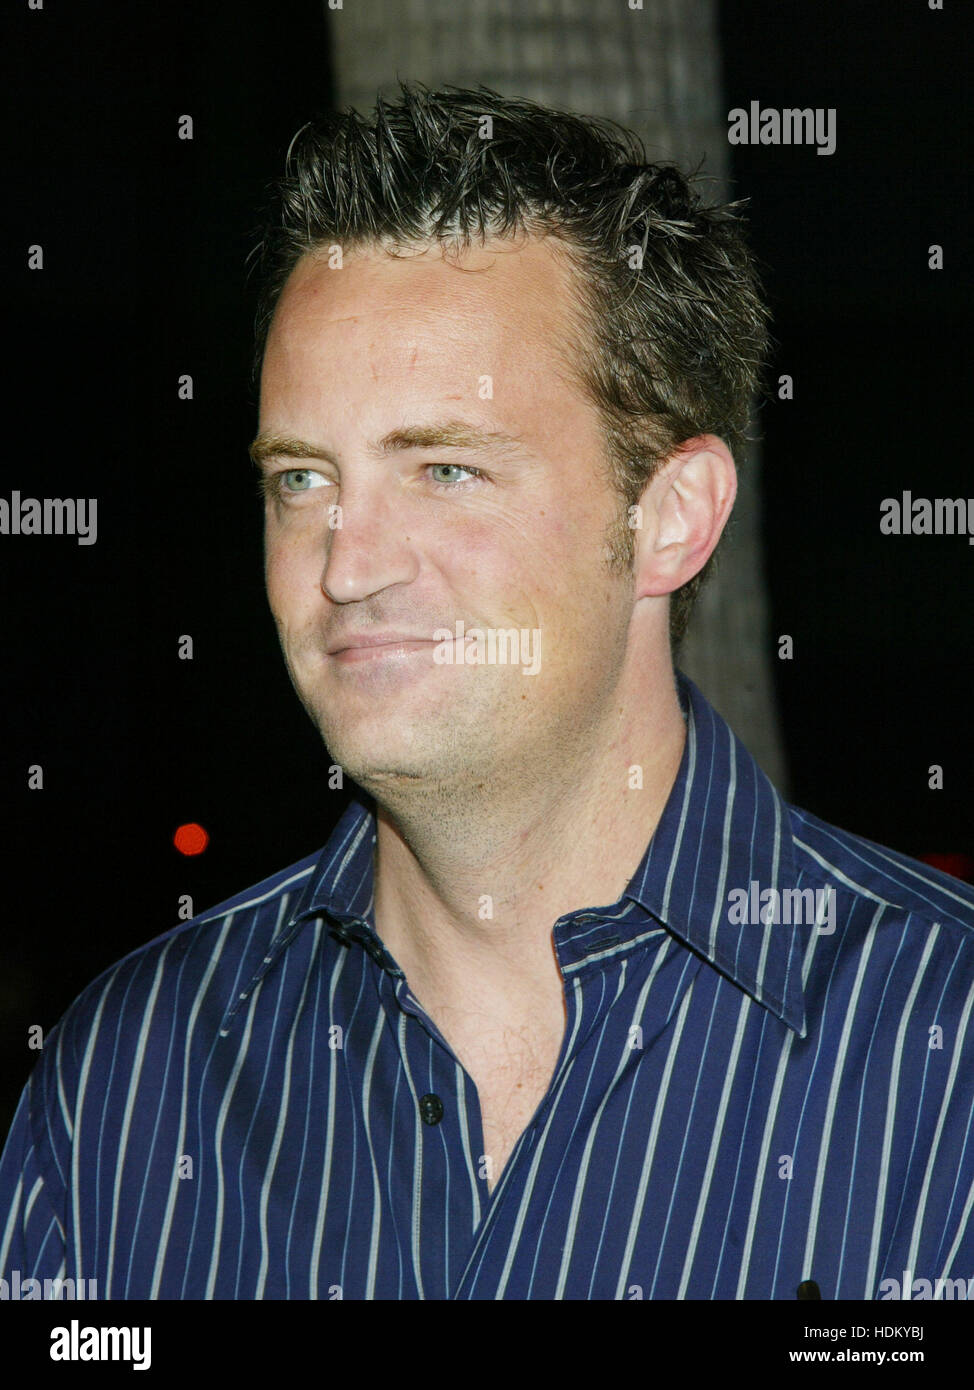 Actor Matthew Perry at the premiere of 'Wimbledon' in Beverly Hills on September 13, 2004 in Los Angeles, California. Photo credit: Francis Specker Stock Photo